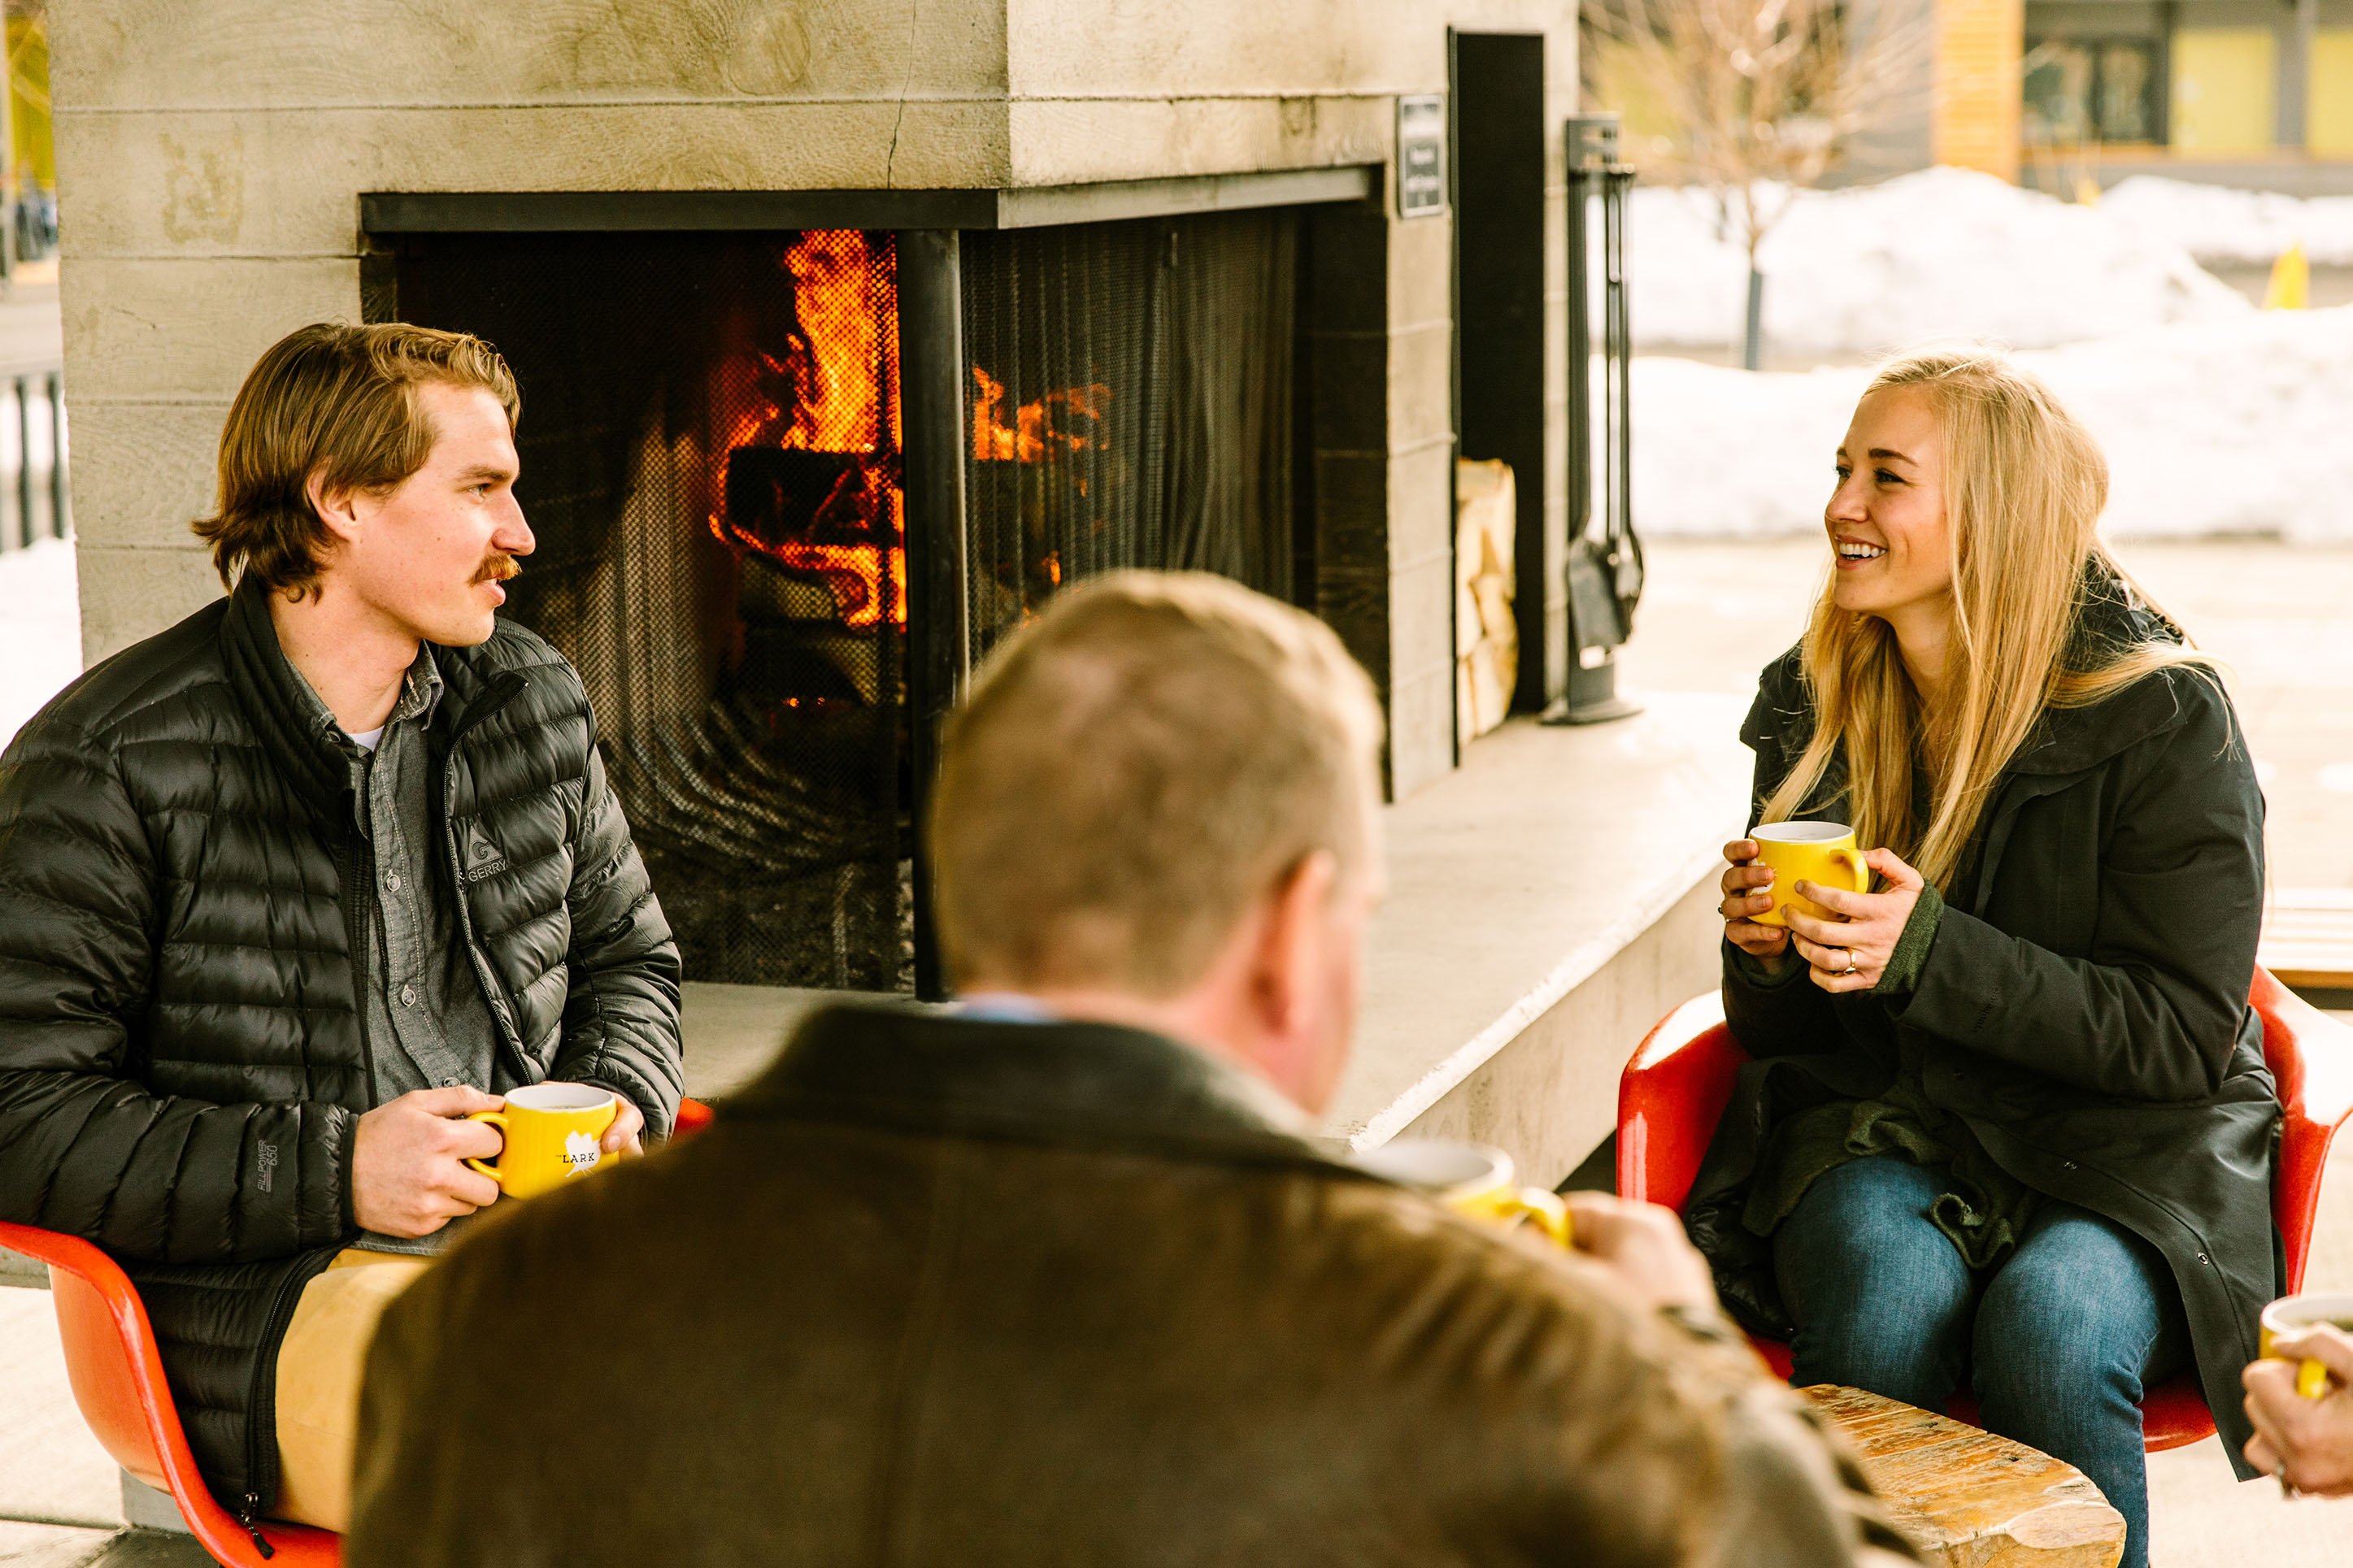 Friends gathering for coffee around a fireplace.